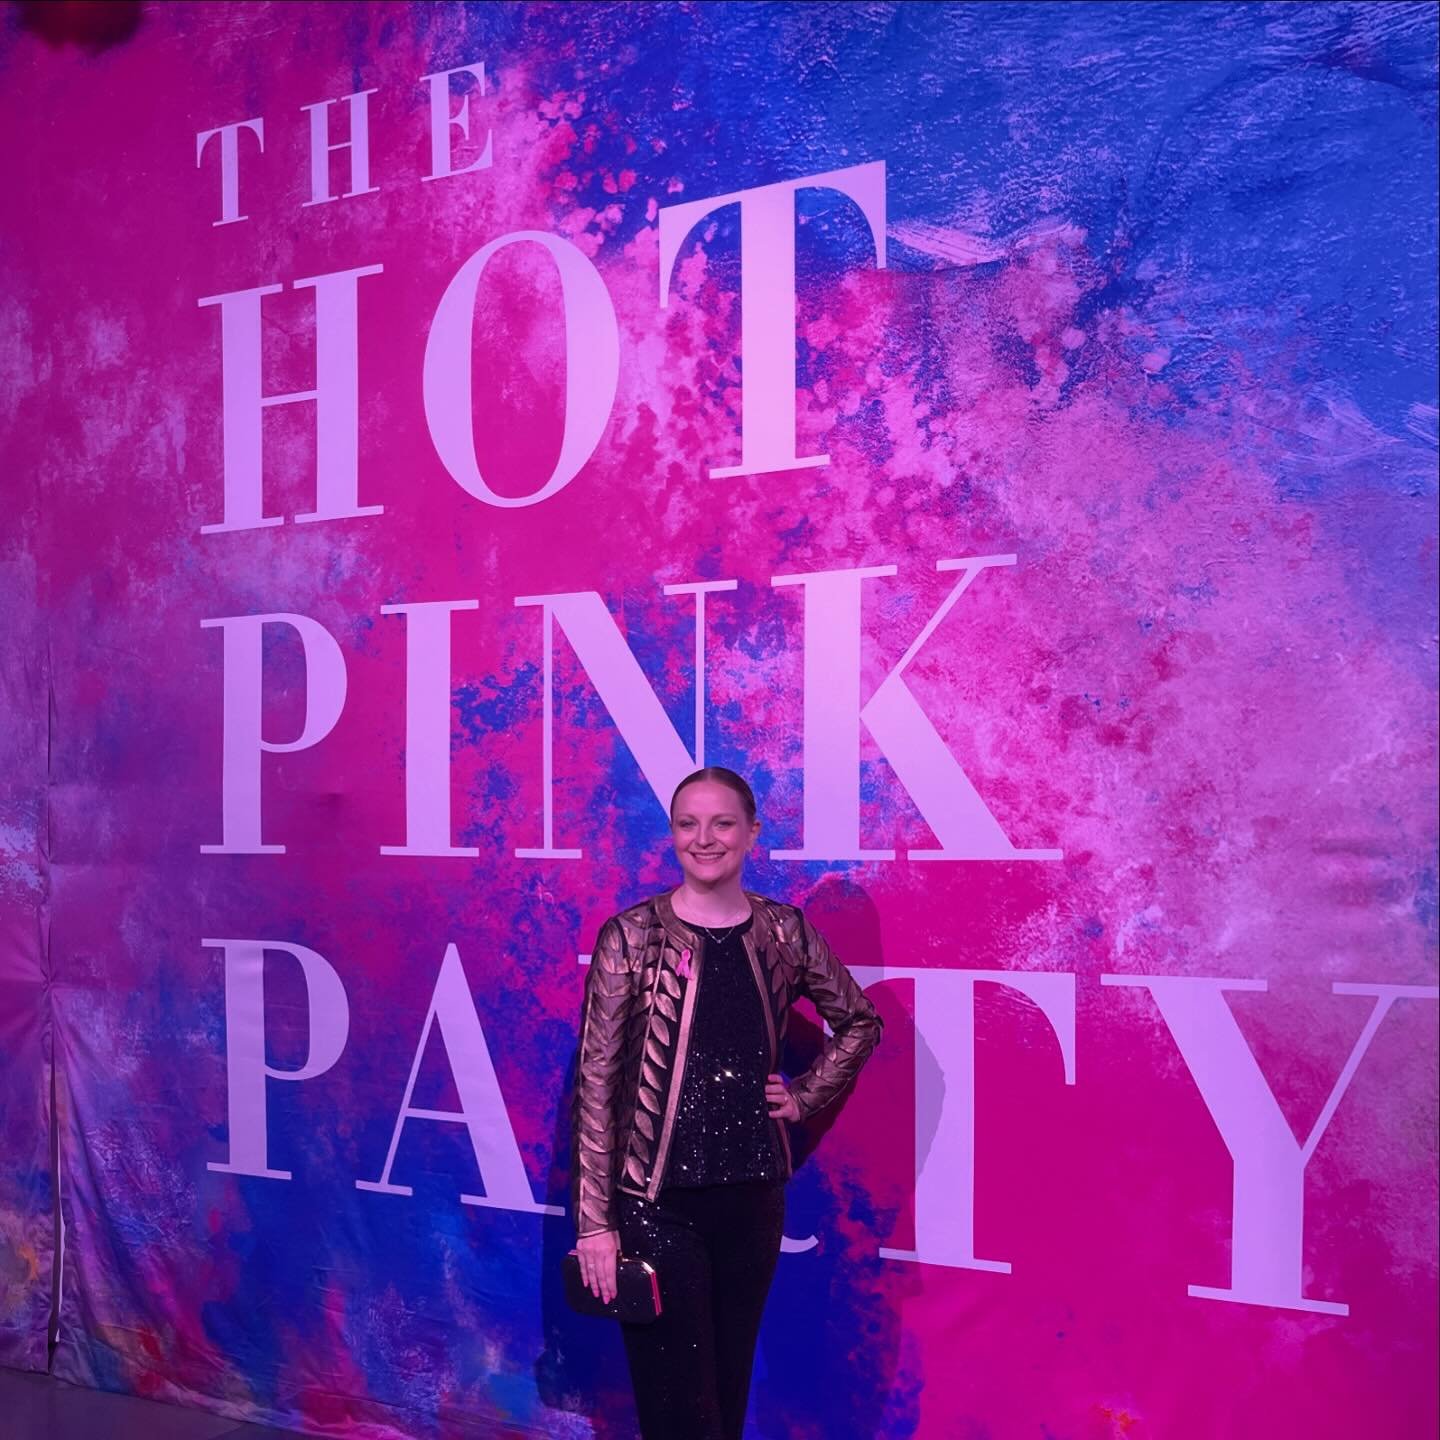 Last night I had the honor and pleasure to attend the @bcrfcure #hotpinkparty with many @thepinkagenda board members and leadership council. It was a beautiful evening where they raised over $11 million dollars for breast cancer research. It was an i